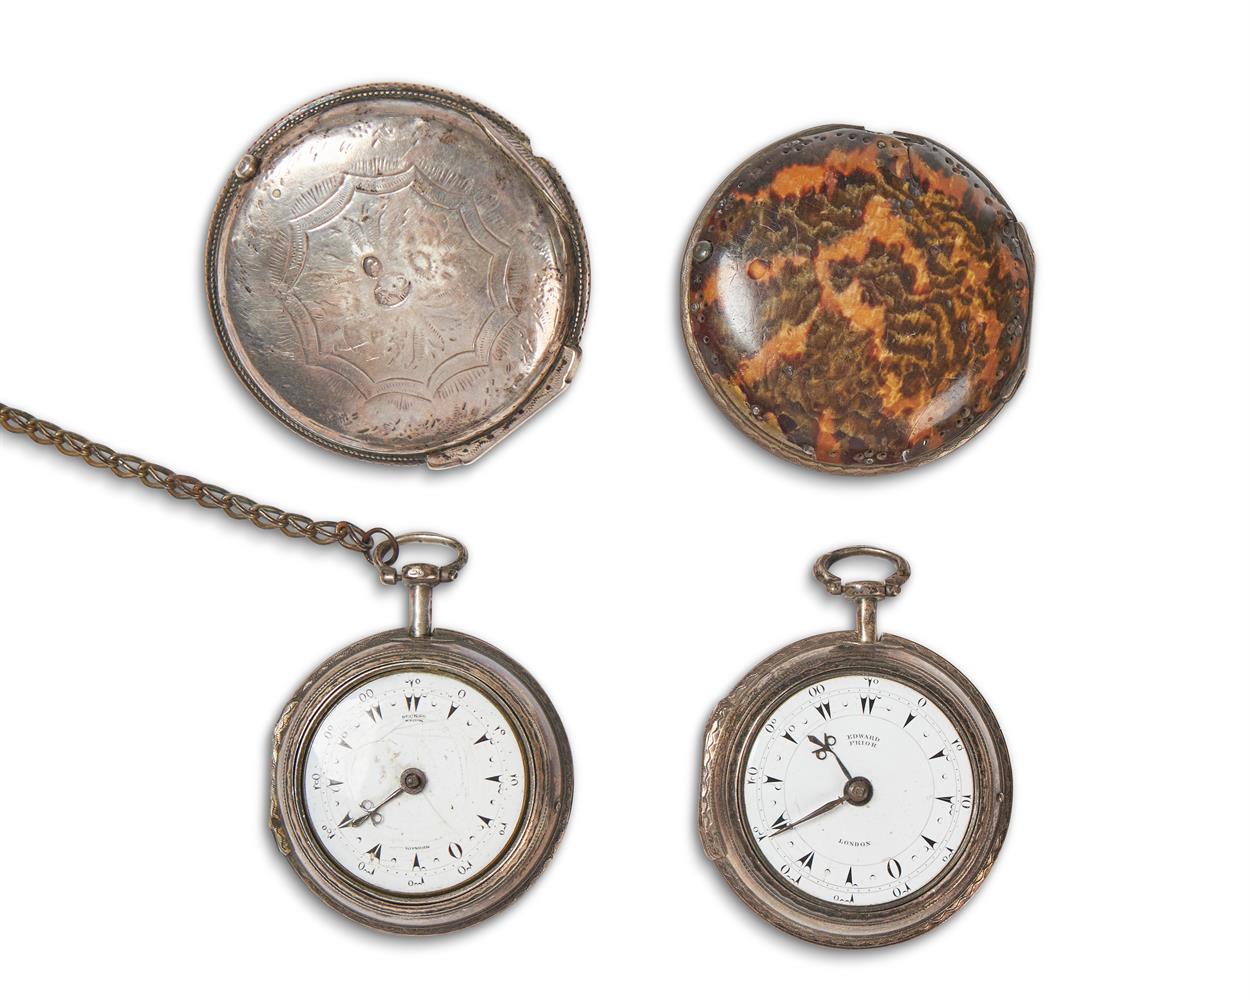 TWO EUROPEAN SILVER WATCHES FOR THE OTTOMAN MARKET, 19TH CENTURY - Image 3 of 4